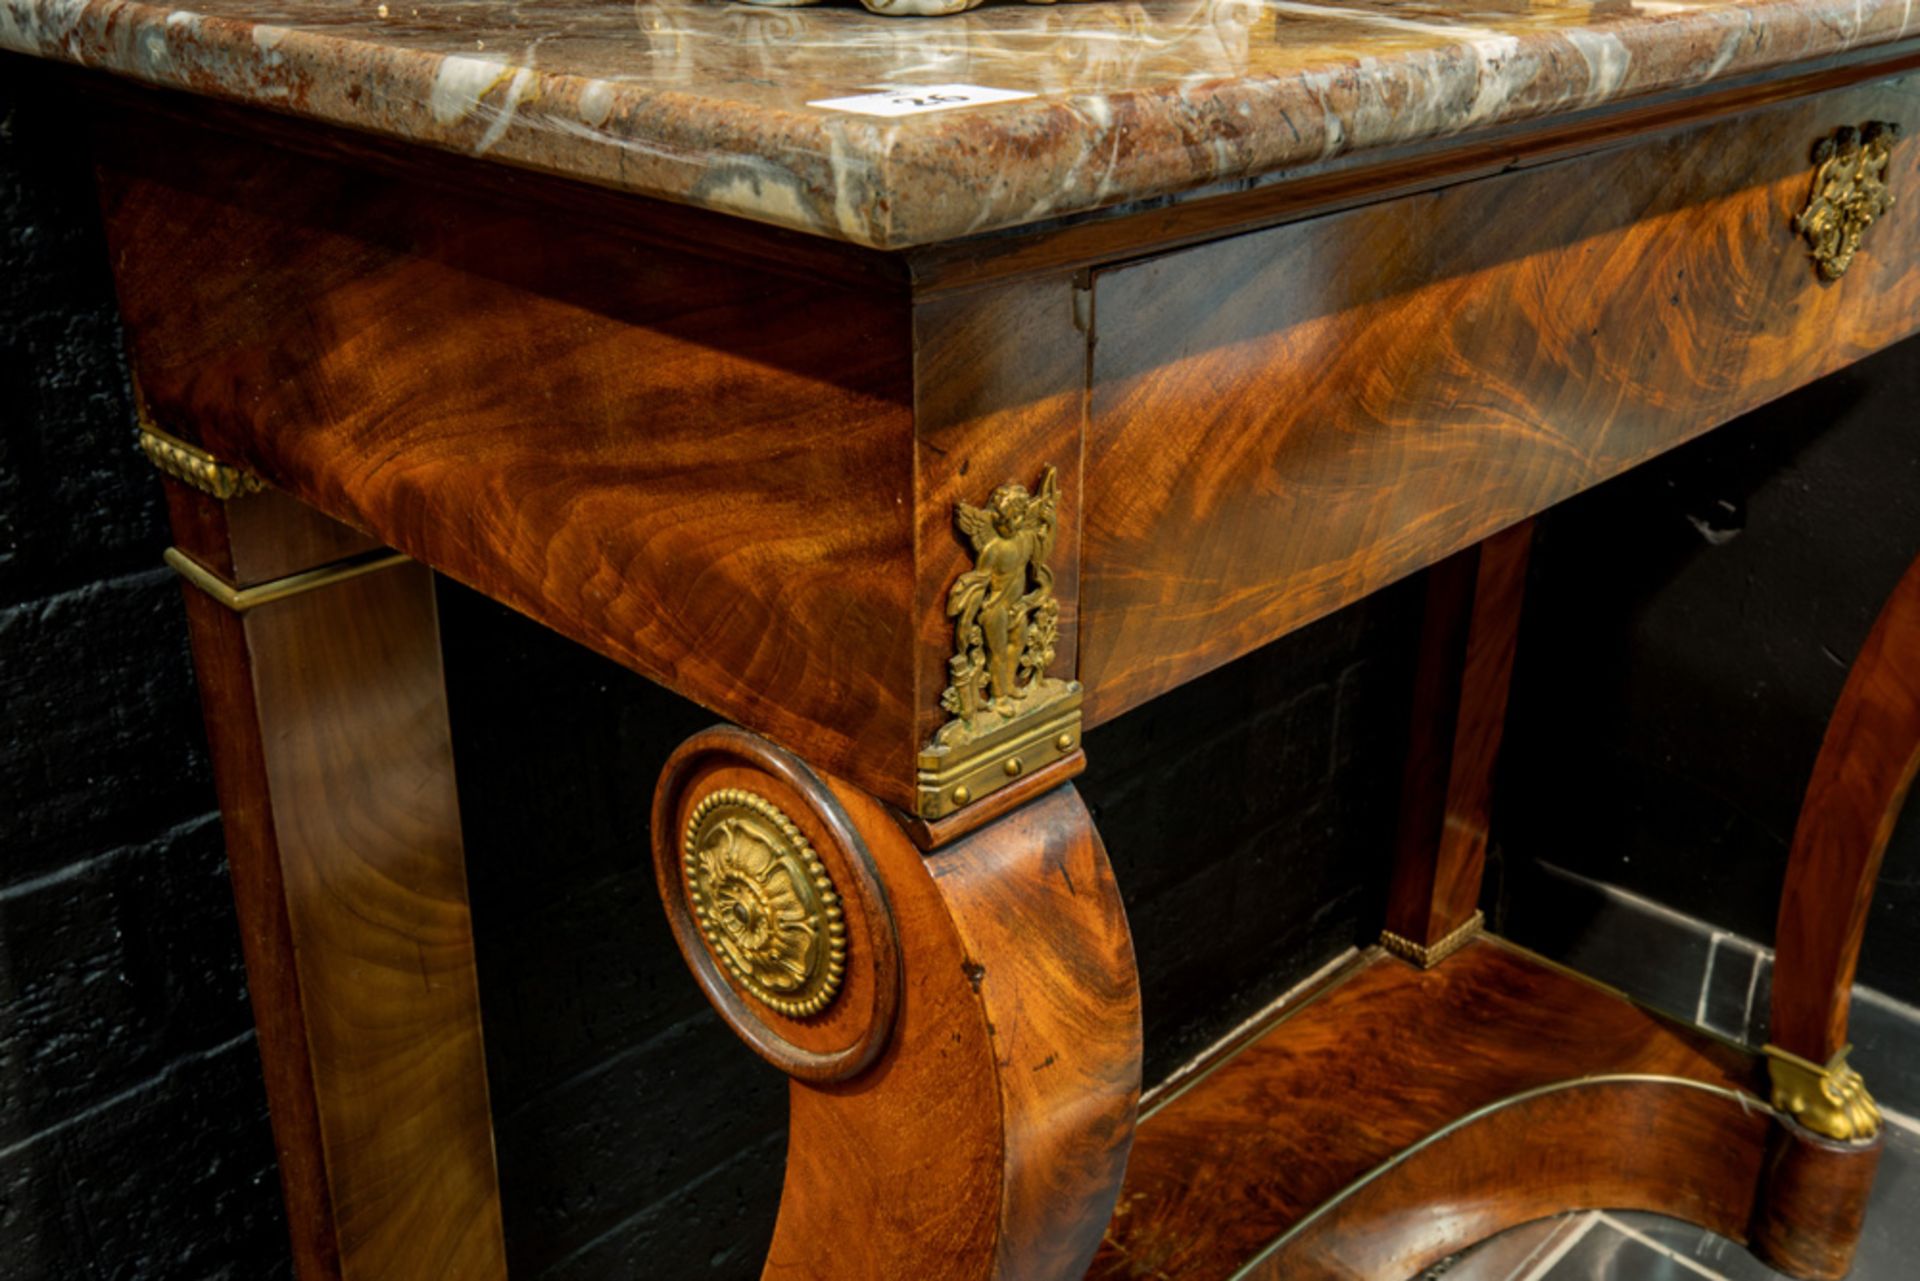 early 19th Cent. Empire style console in mahogany with ornaments in gilded bronze - with a drawer - Image 2 of 3